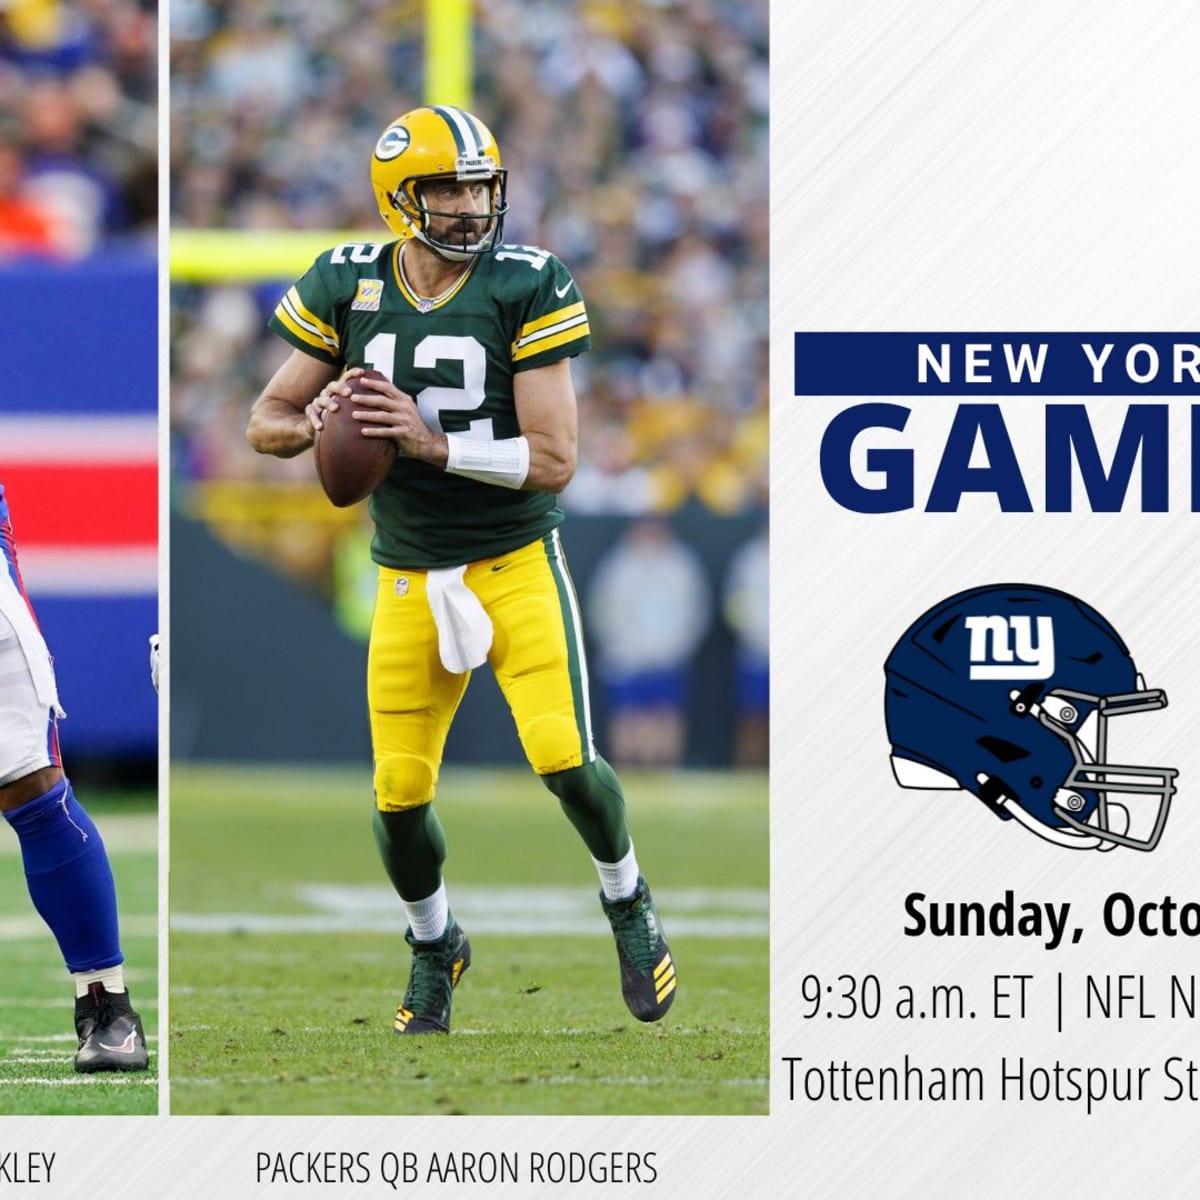 New York Giants vs. Green Bay Packers: How to Watch, Odds, History